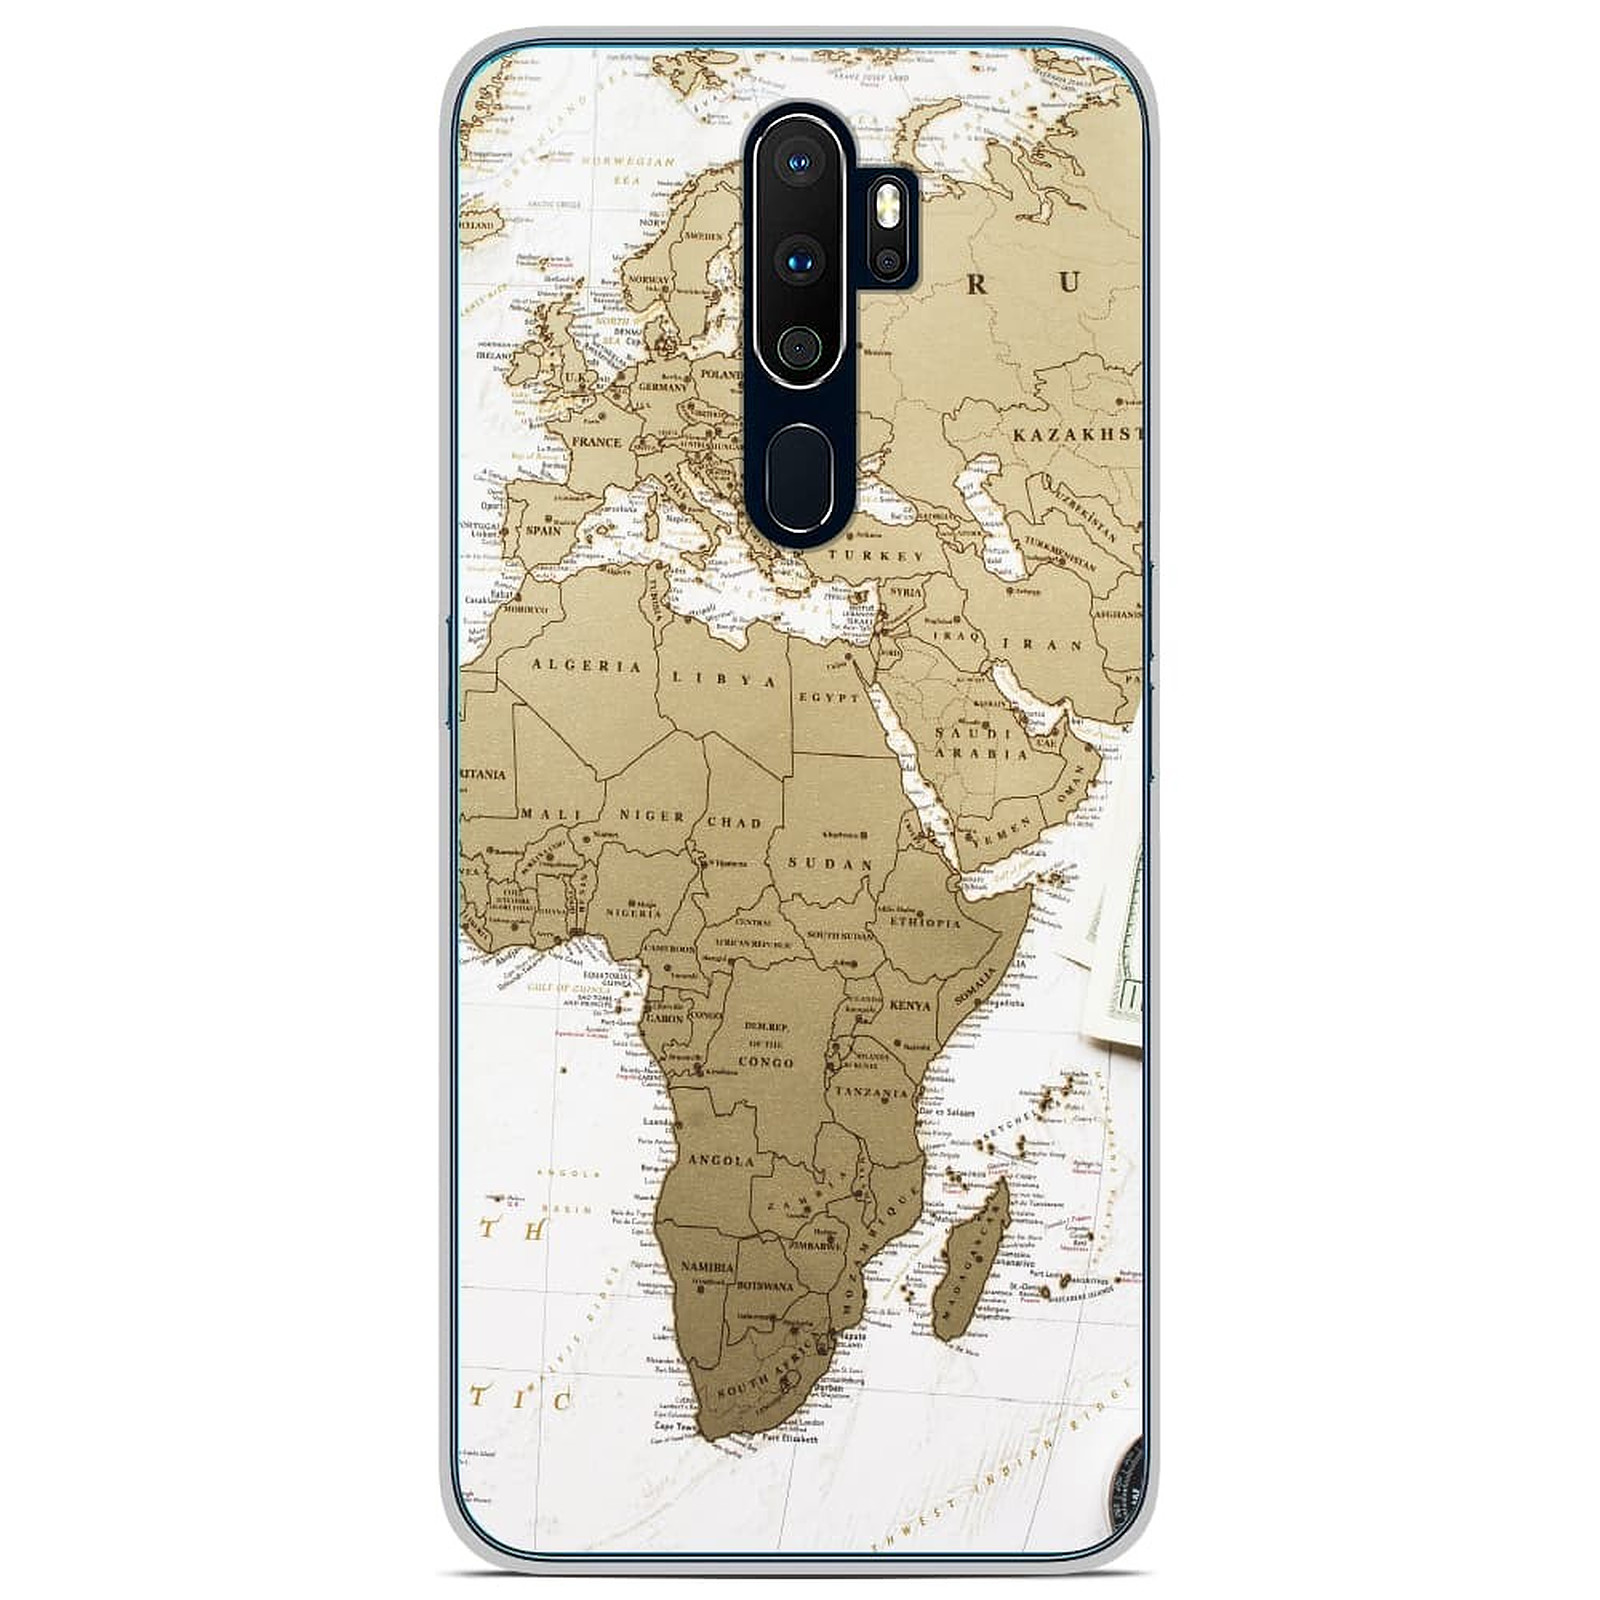 1001 Coques Coque silicone gel Oppo A9 2020 motif Map Europe Afrique - Coque telephone 1001Coques